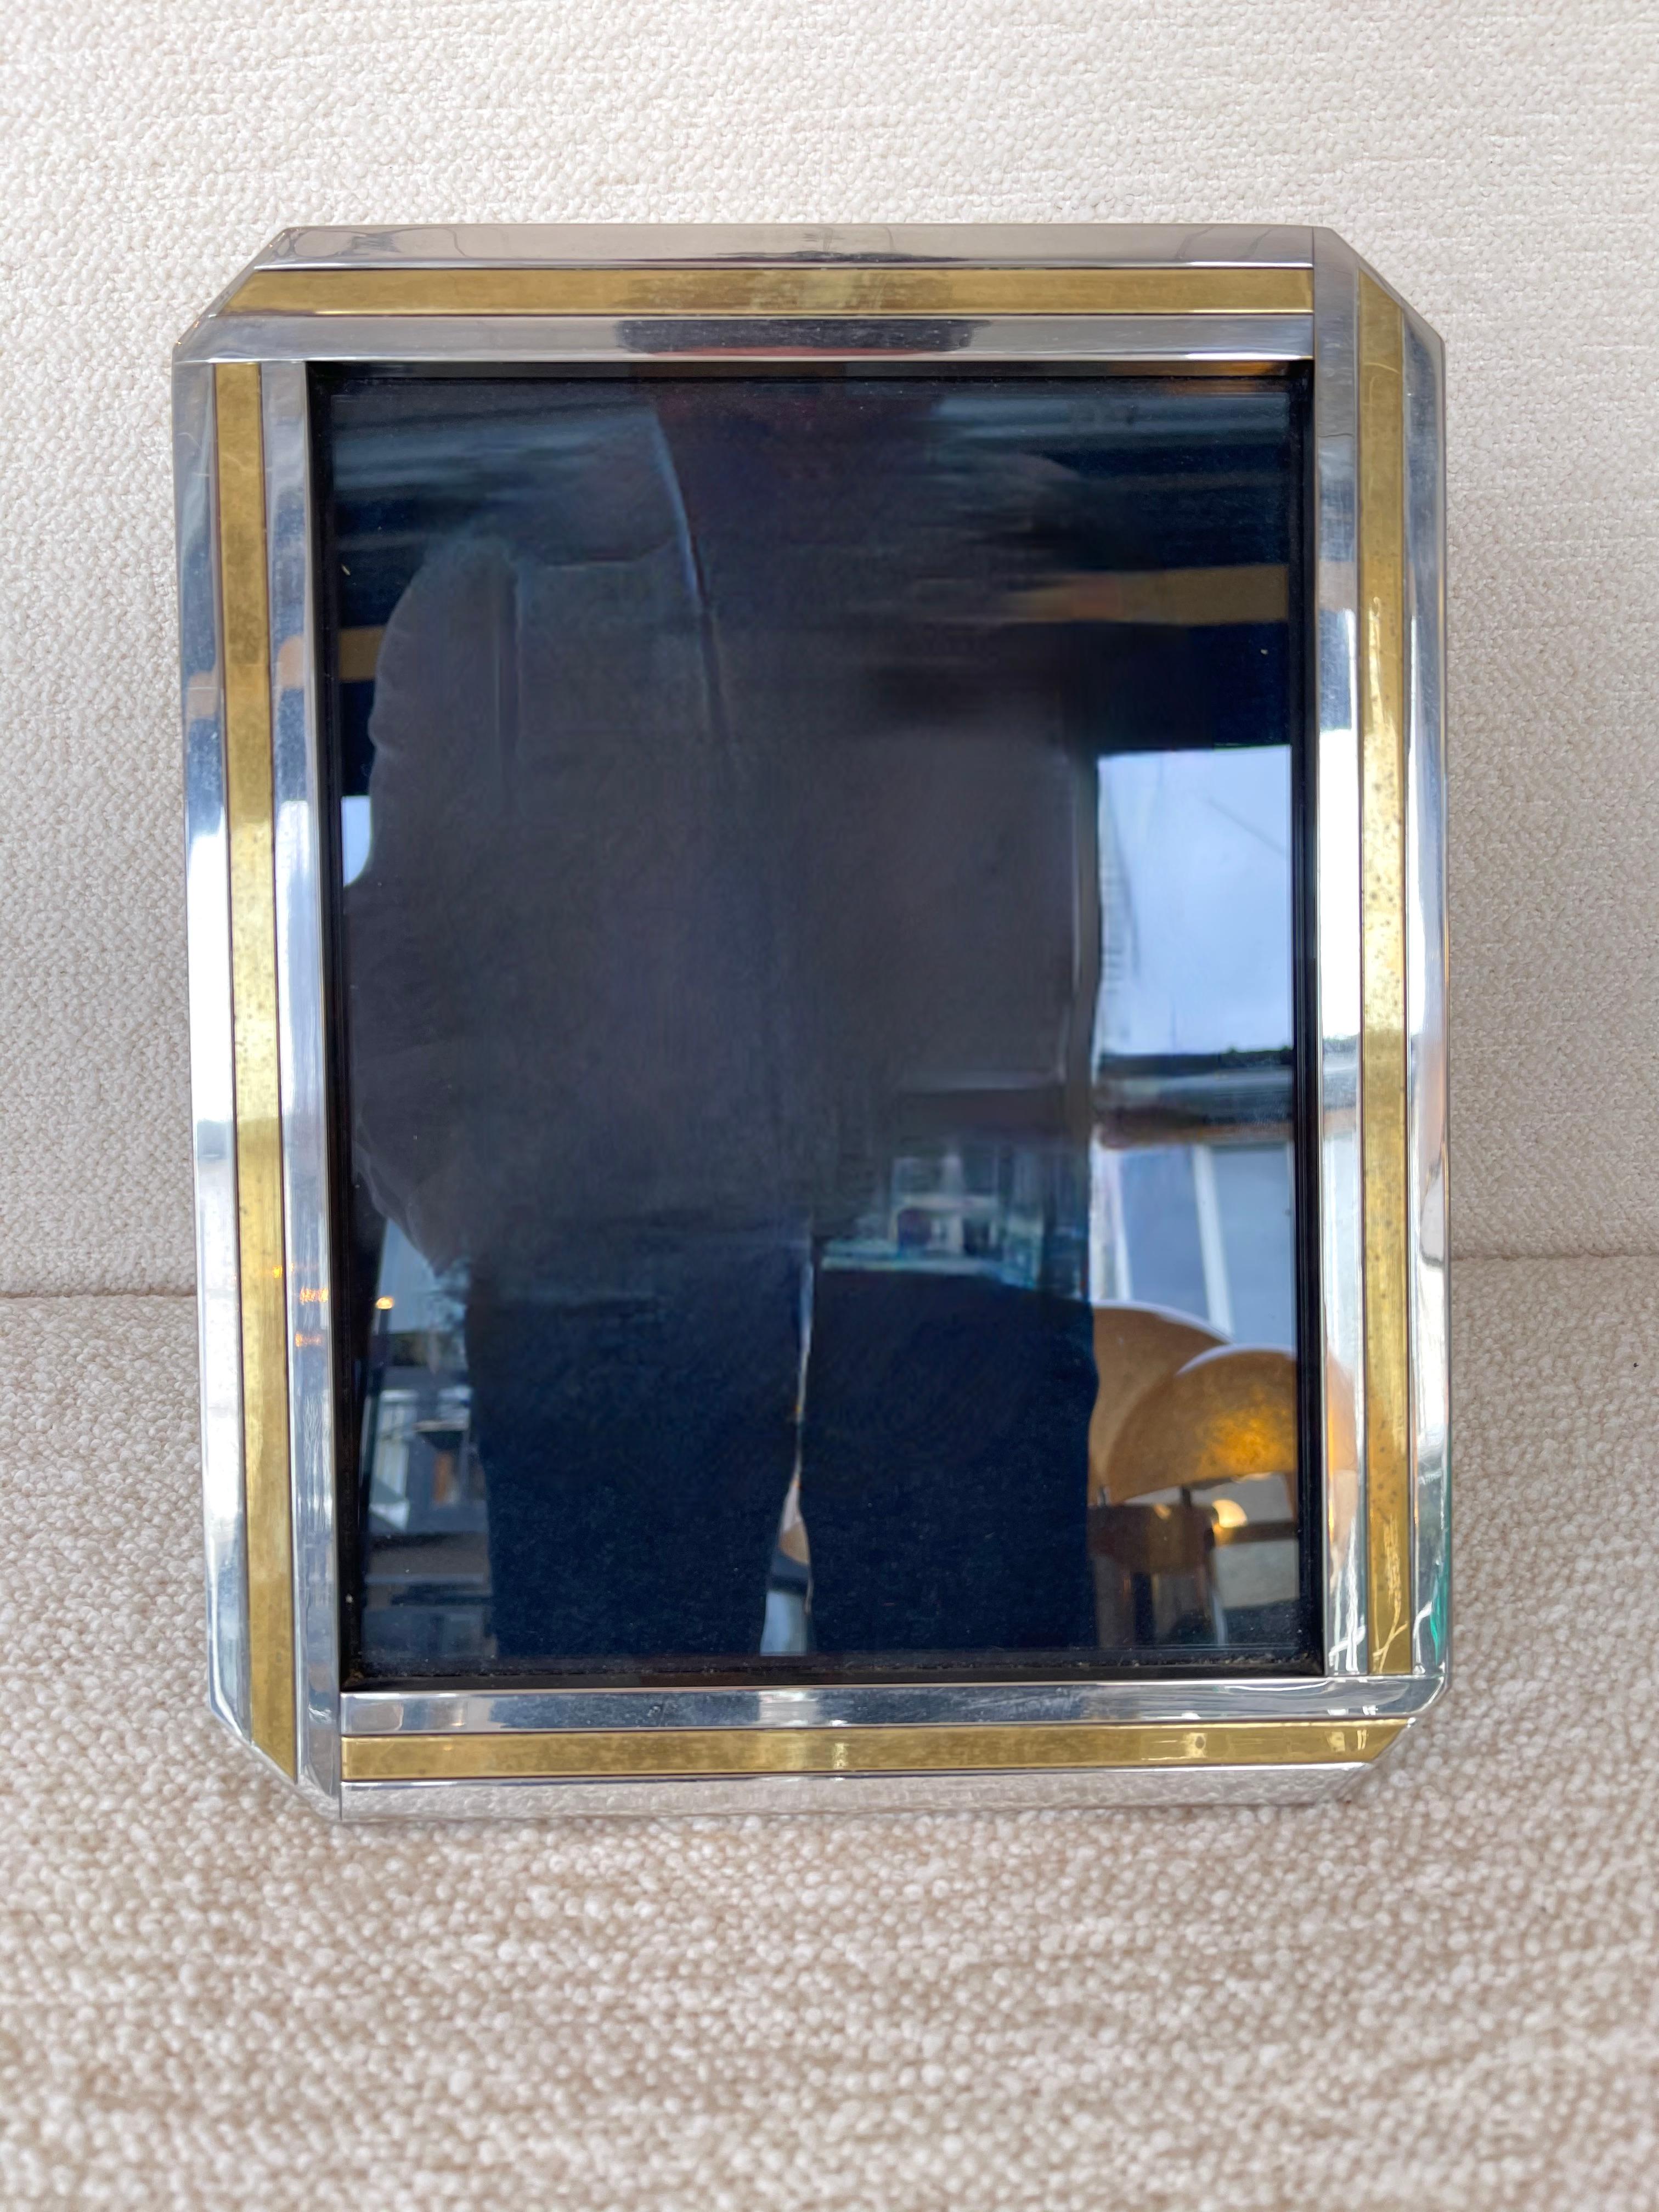 Quality metal chrome and brass photo picture frame attributed to Romeo Rega. Intern frame measurements 24 x 18 centimeters. Horizontal or vertical position. Famous design like Maison Jansen, Charles, Galerie Maison et Jardin.